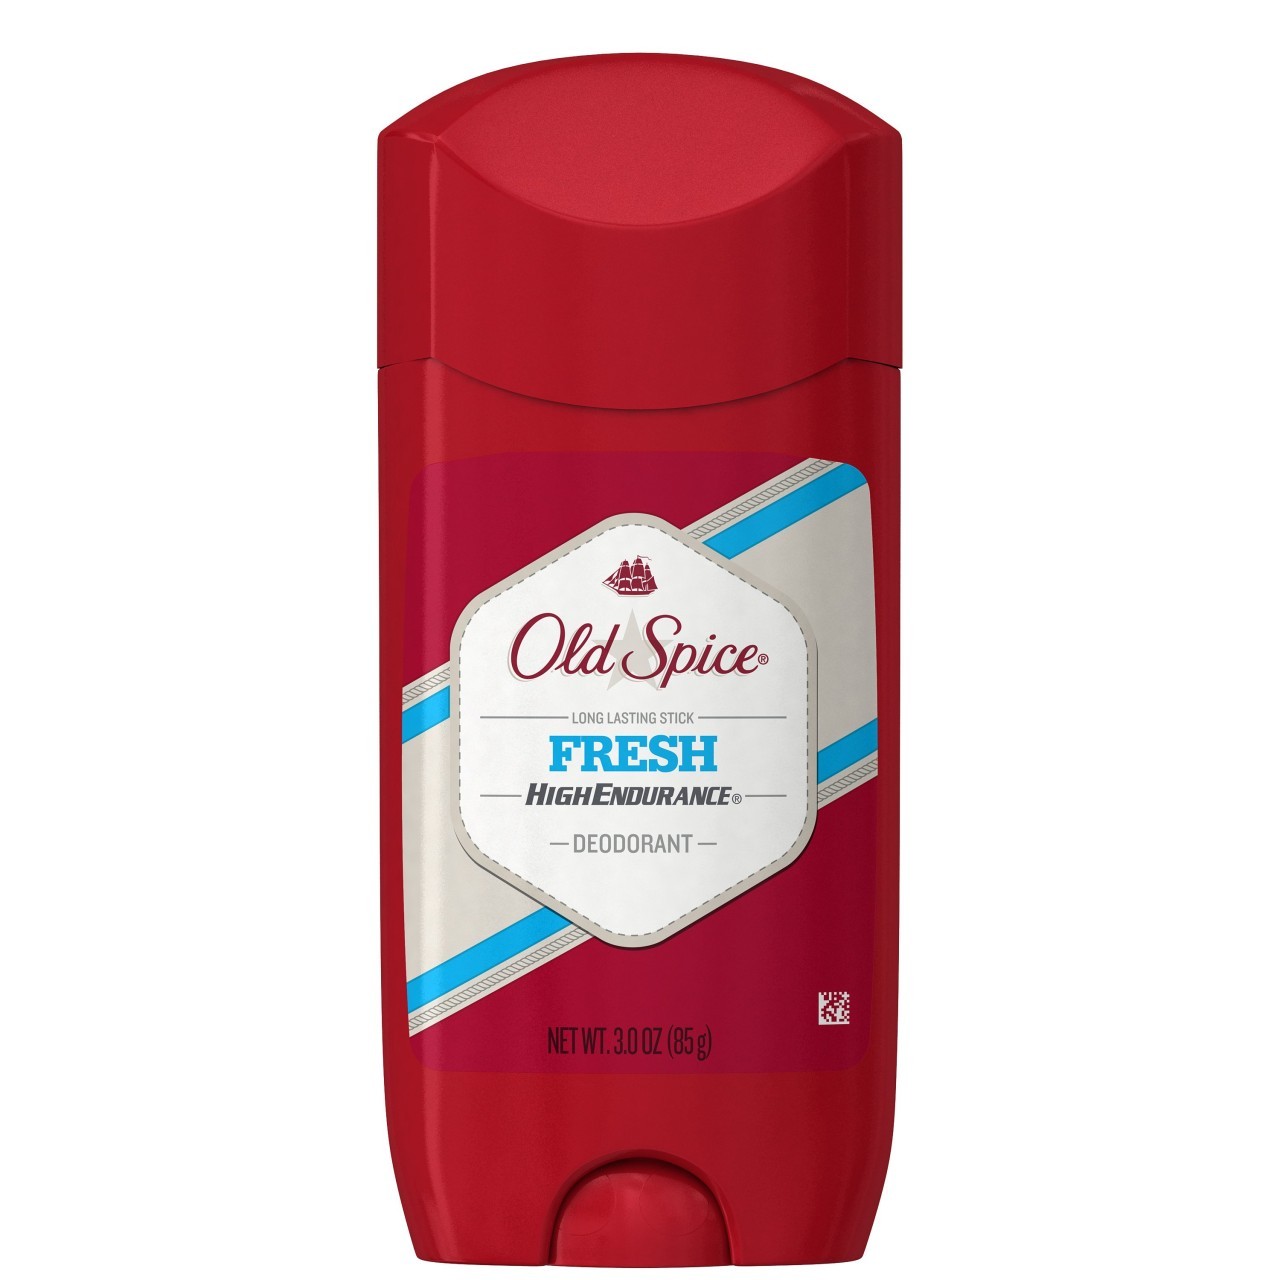 OLD SPICE DEODERANT HE FRESH 3oz